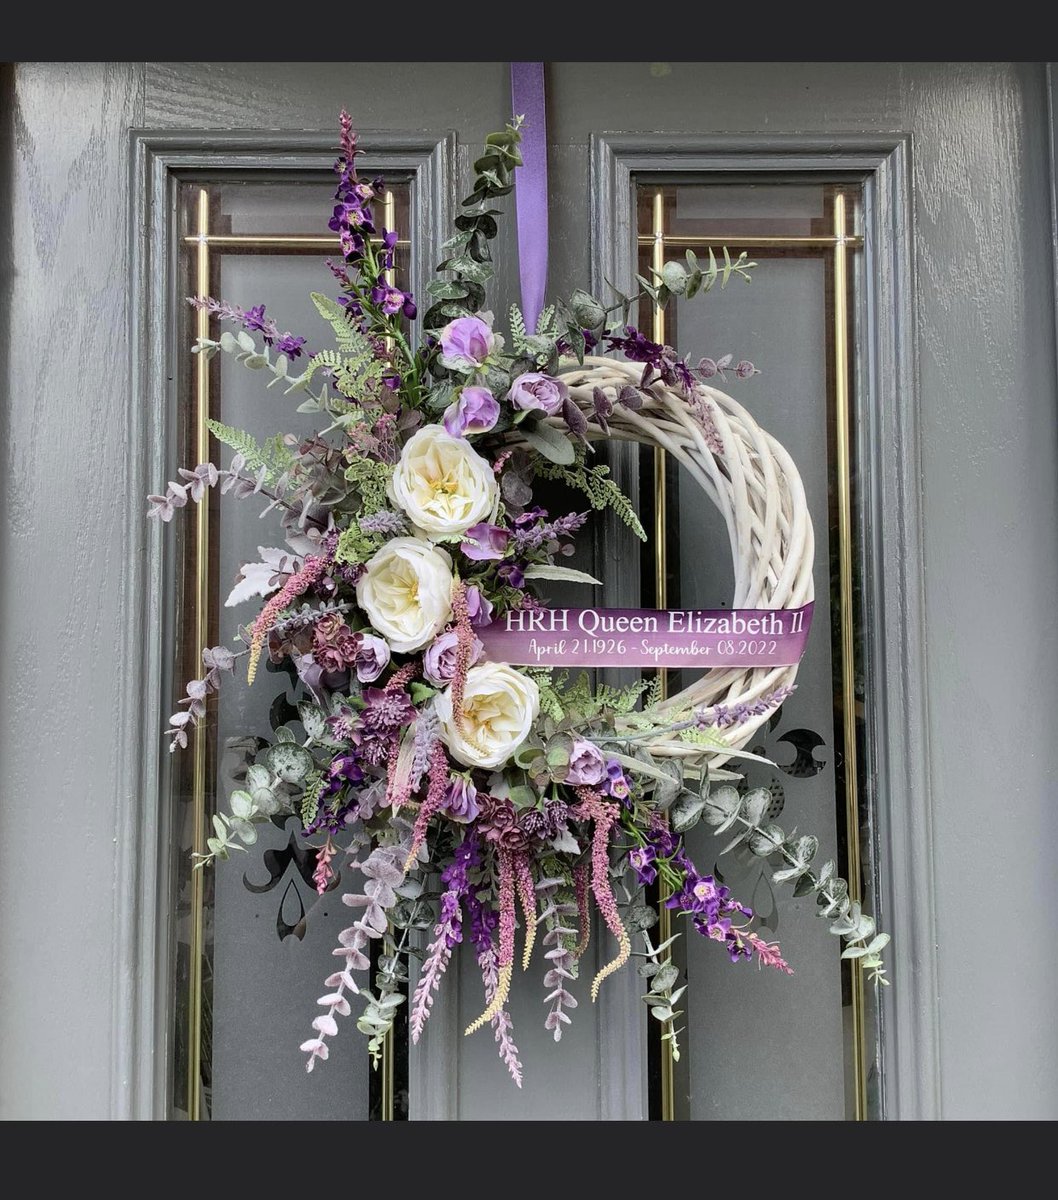 With the respect she has for the late Queen Elizabeth my friend who has also gone through the most traumatic loss recently losing her sole mate & life partner in a road traffic accident created this stunning door arrangement as a fitting tribute 💜 #QueenElizabeth #RoyalFamily